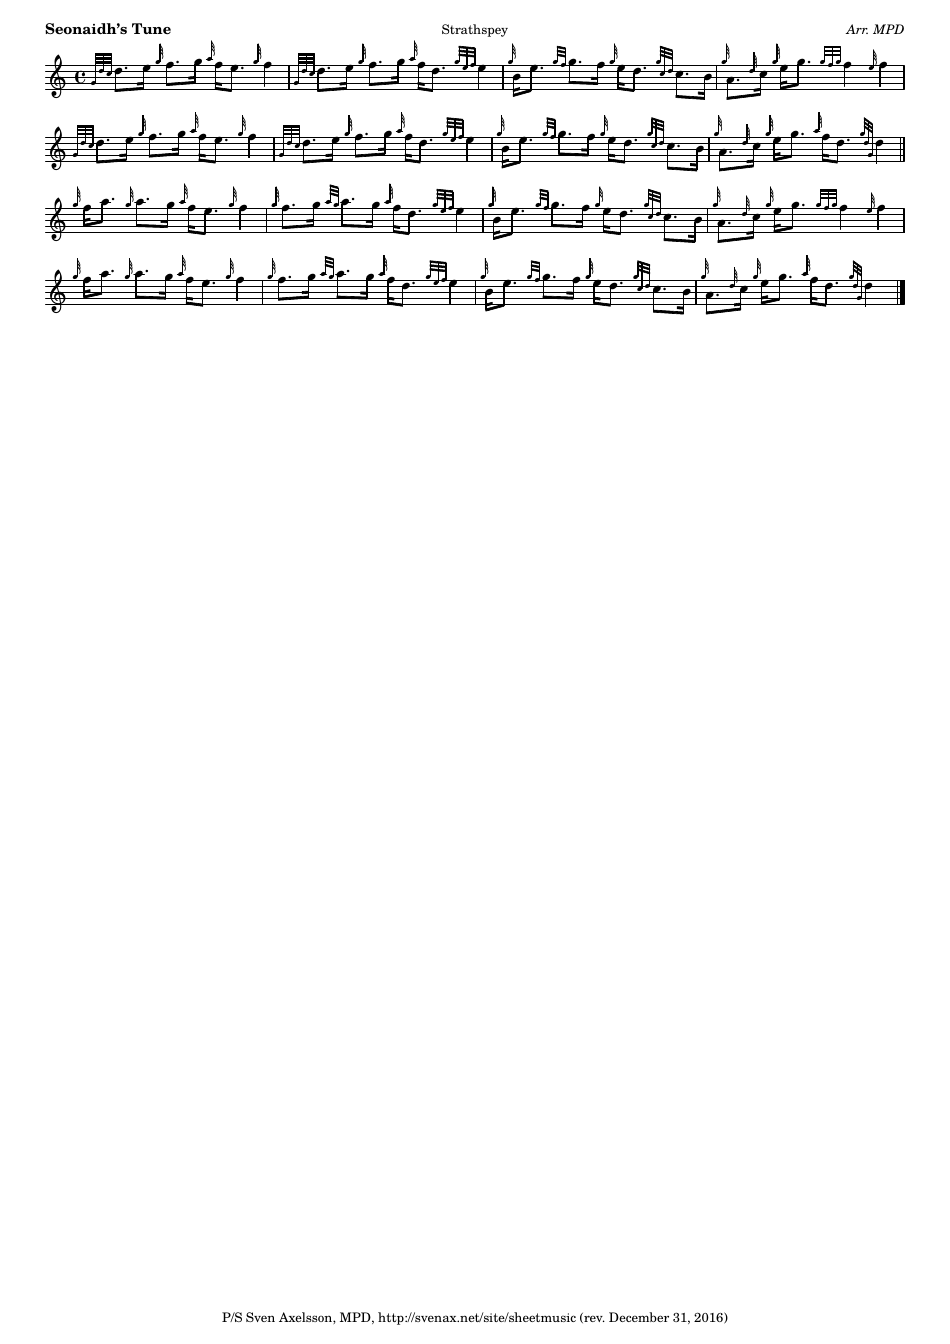 Seonaidh's Tune - Strathspey Bagpipe Sheet Music Preview Image